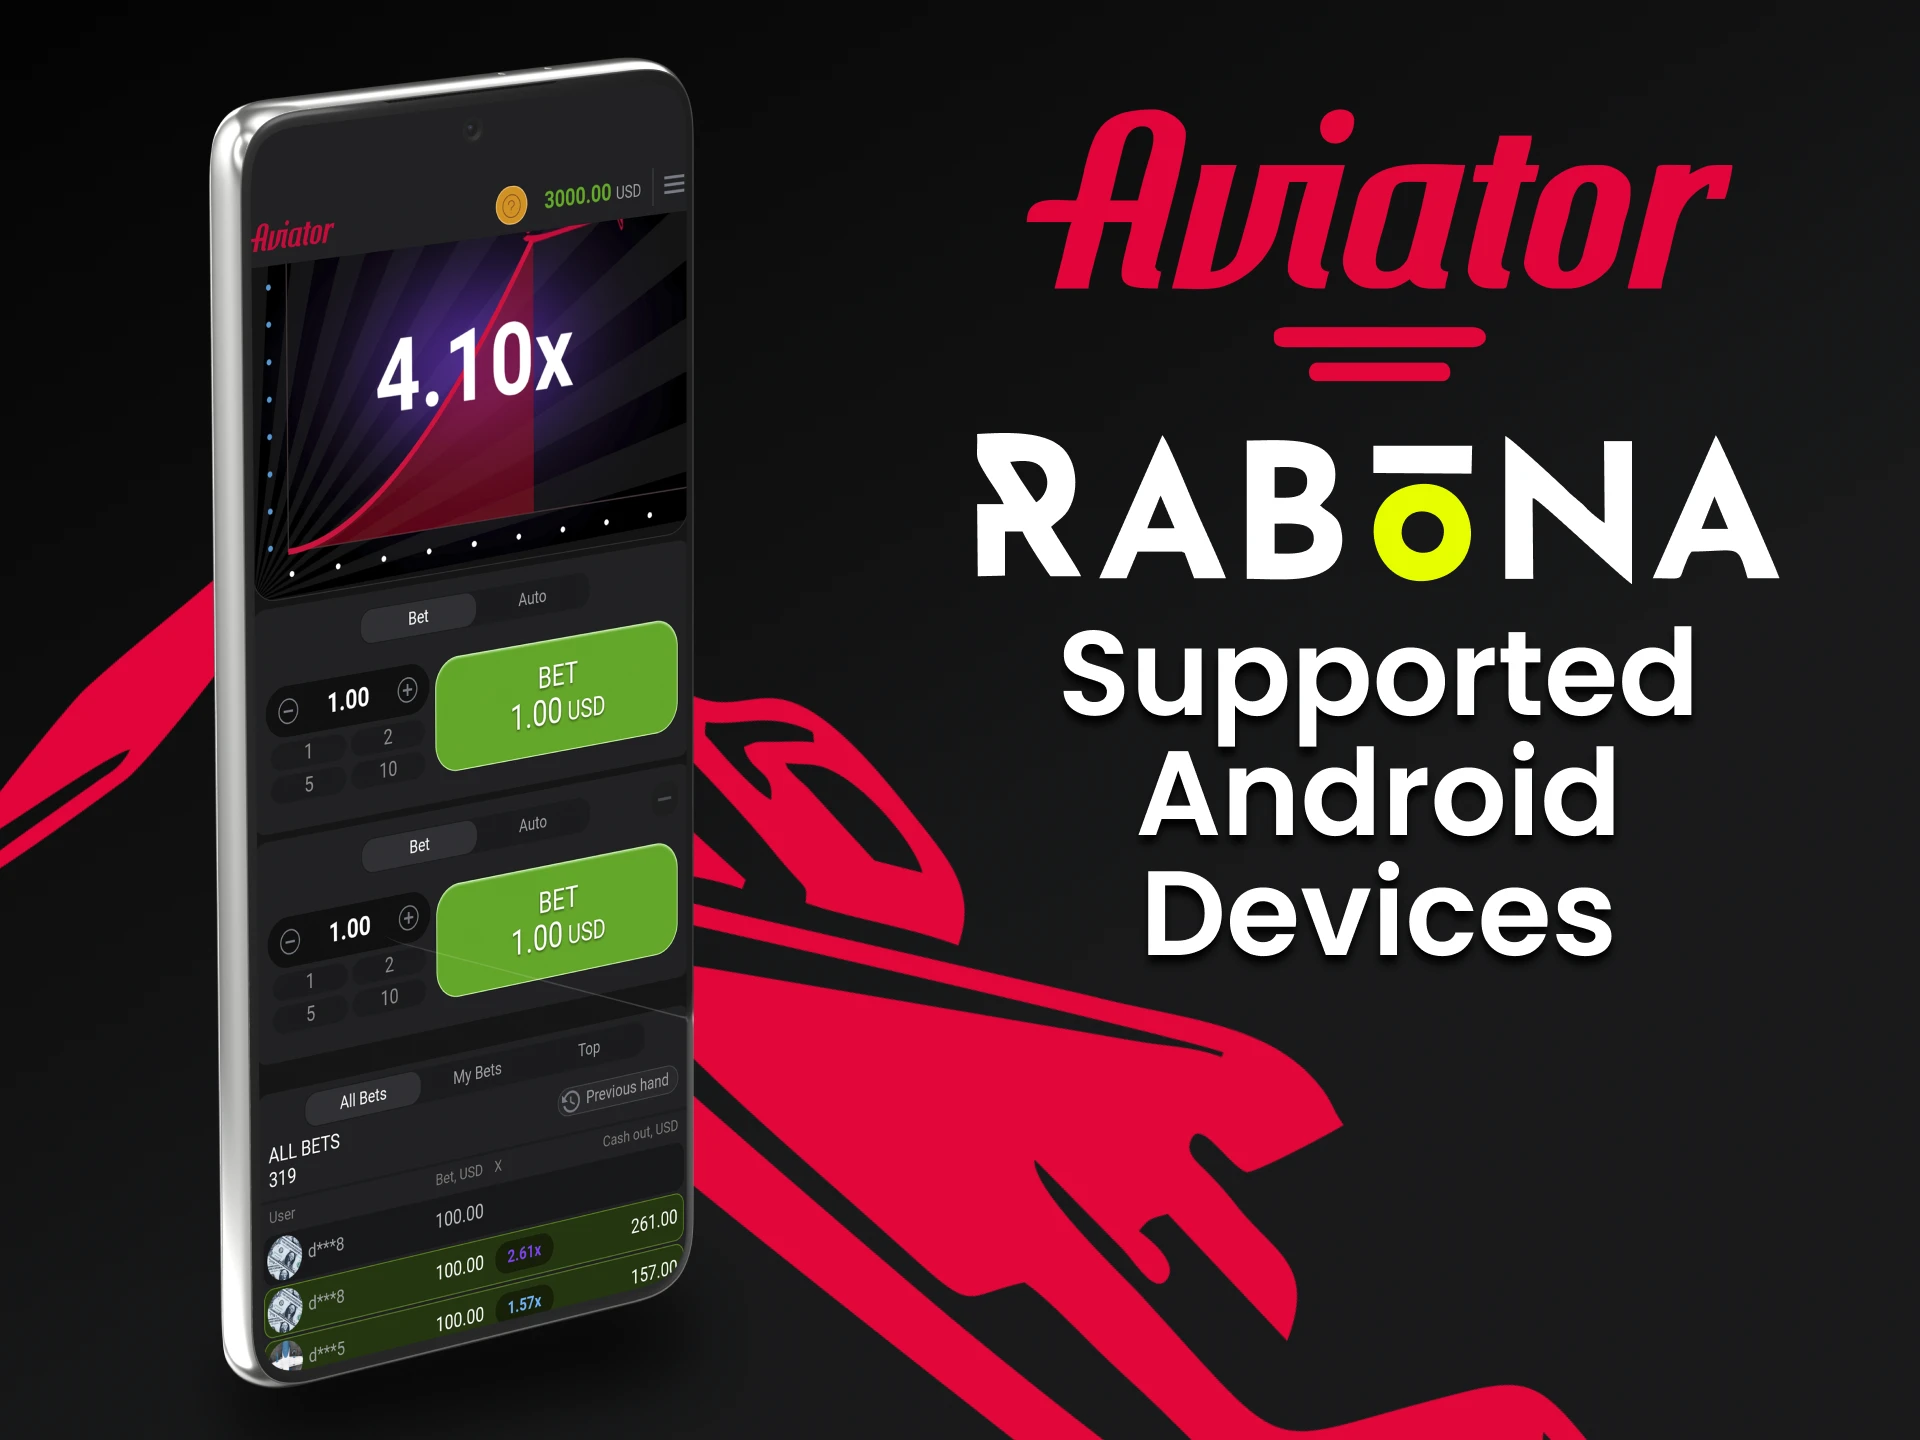 Play Aviator through the Rabona app for Android.